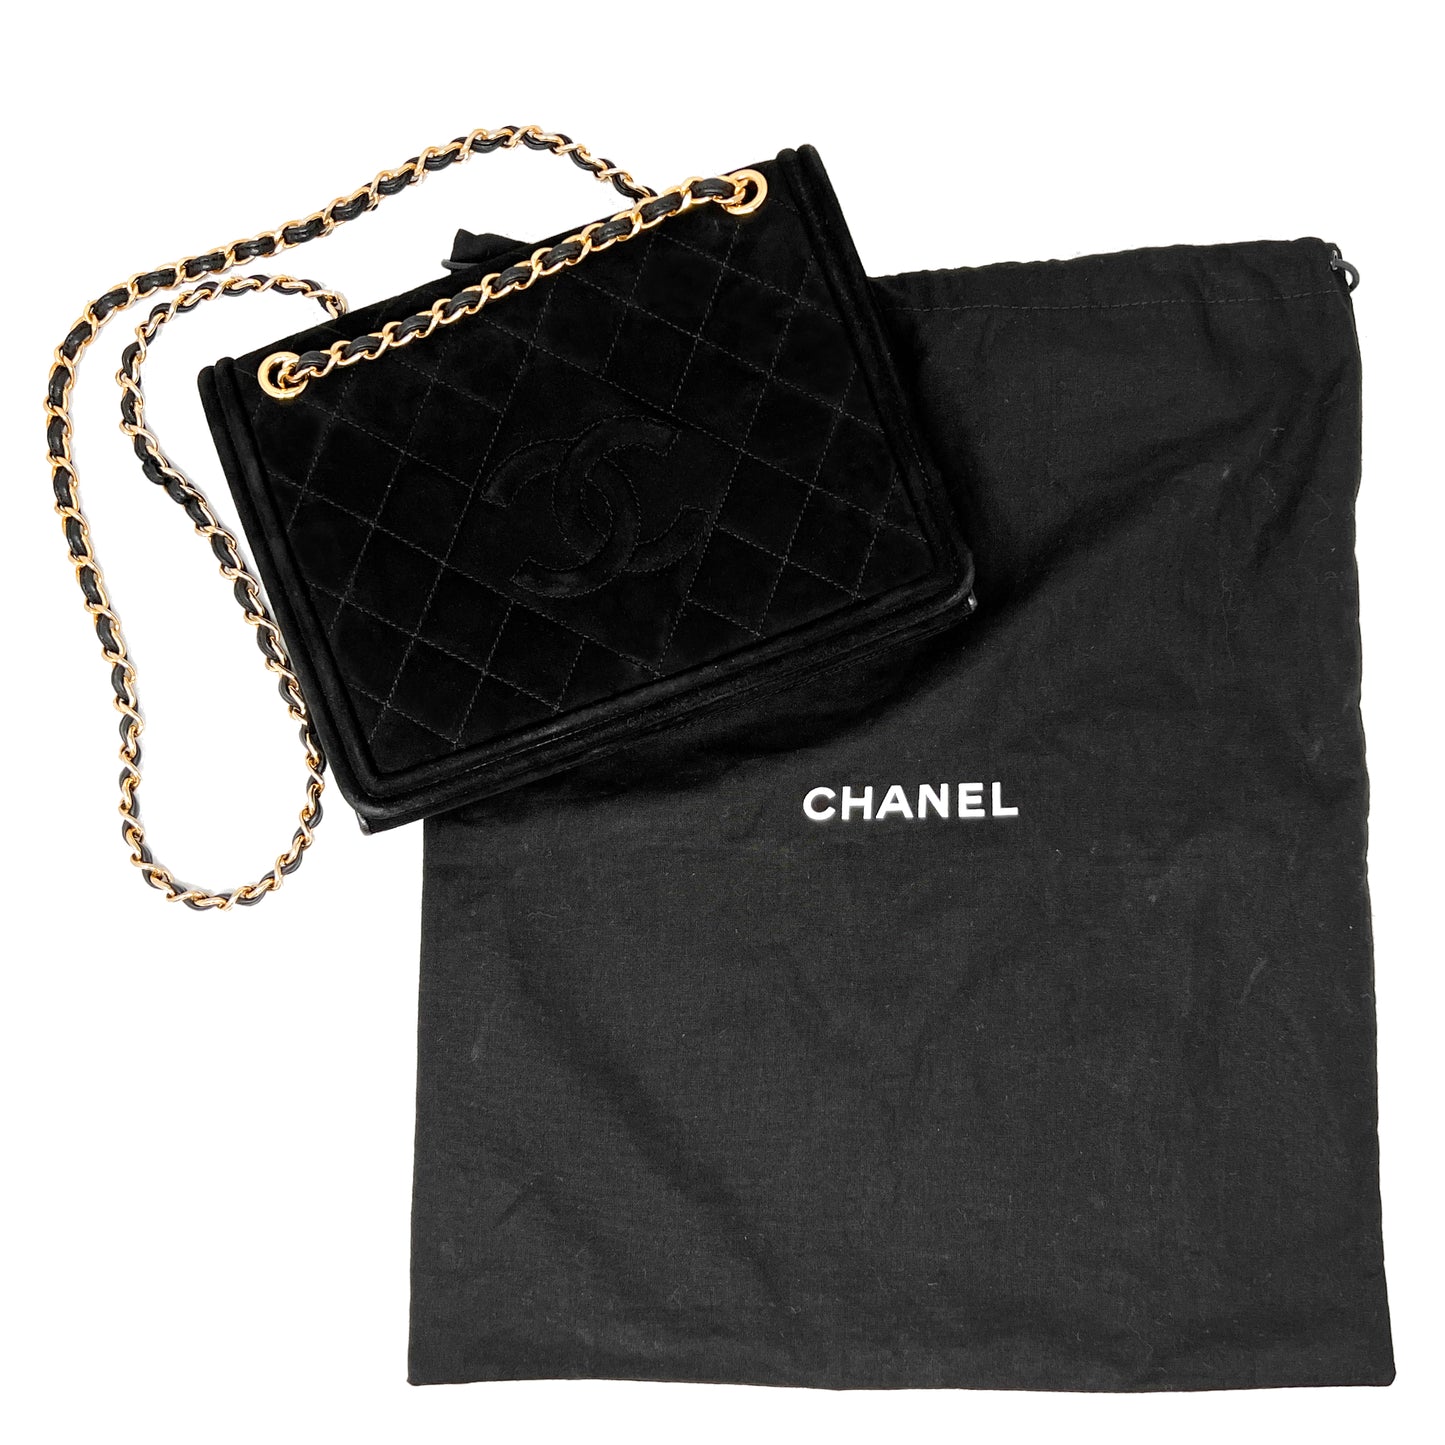 Chanel 1991 Vintage Suede Quilted Flap Bag